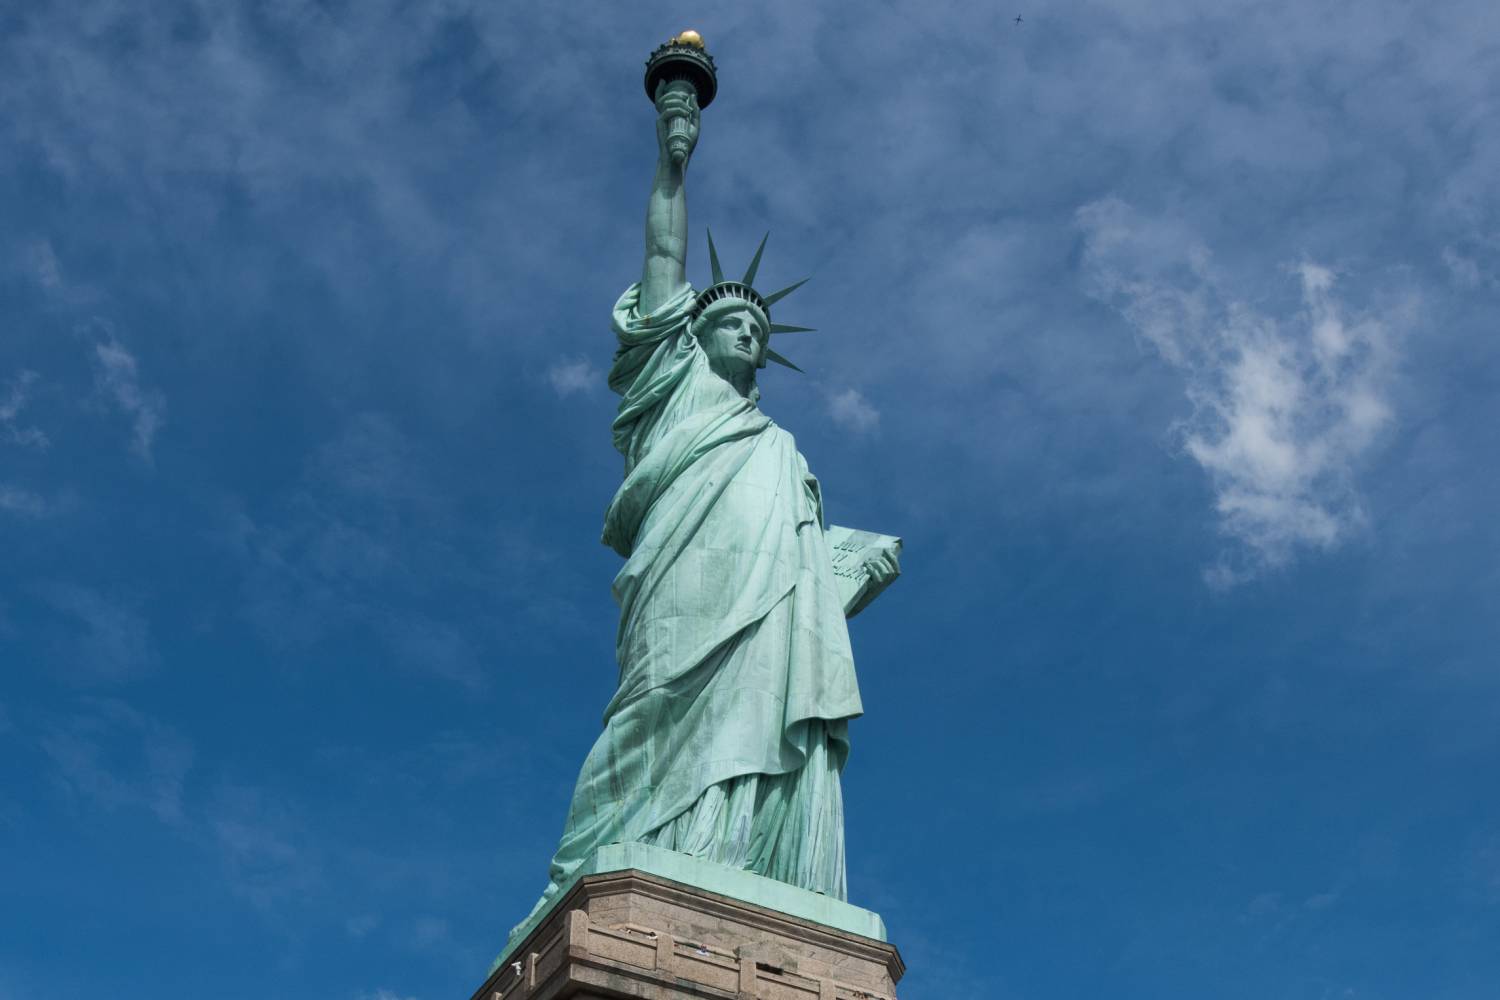 This General Knowledge Quiz Is Not That Hard, So to Impress Me, You’ll Need to Score 16/20 Statue Of Liberty